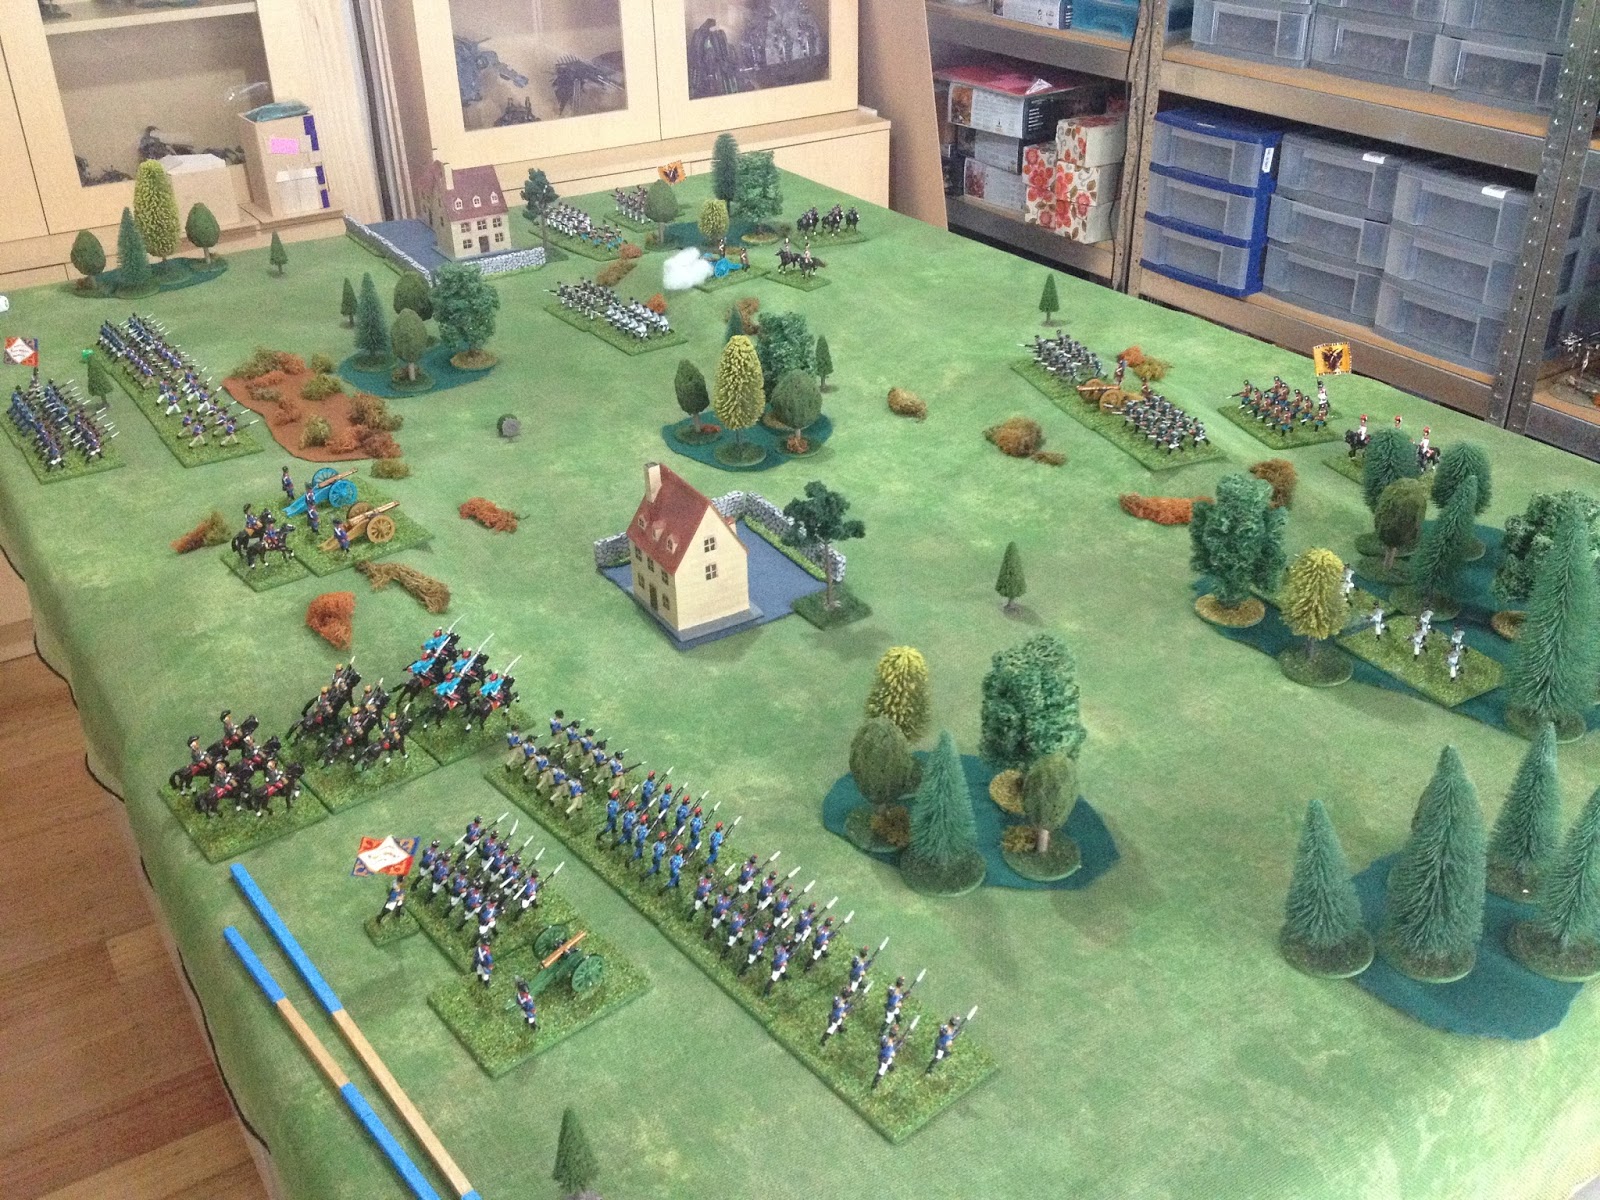 Grid based wargaming but not always Napoleonic wargame trying out